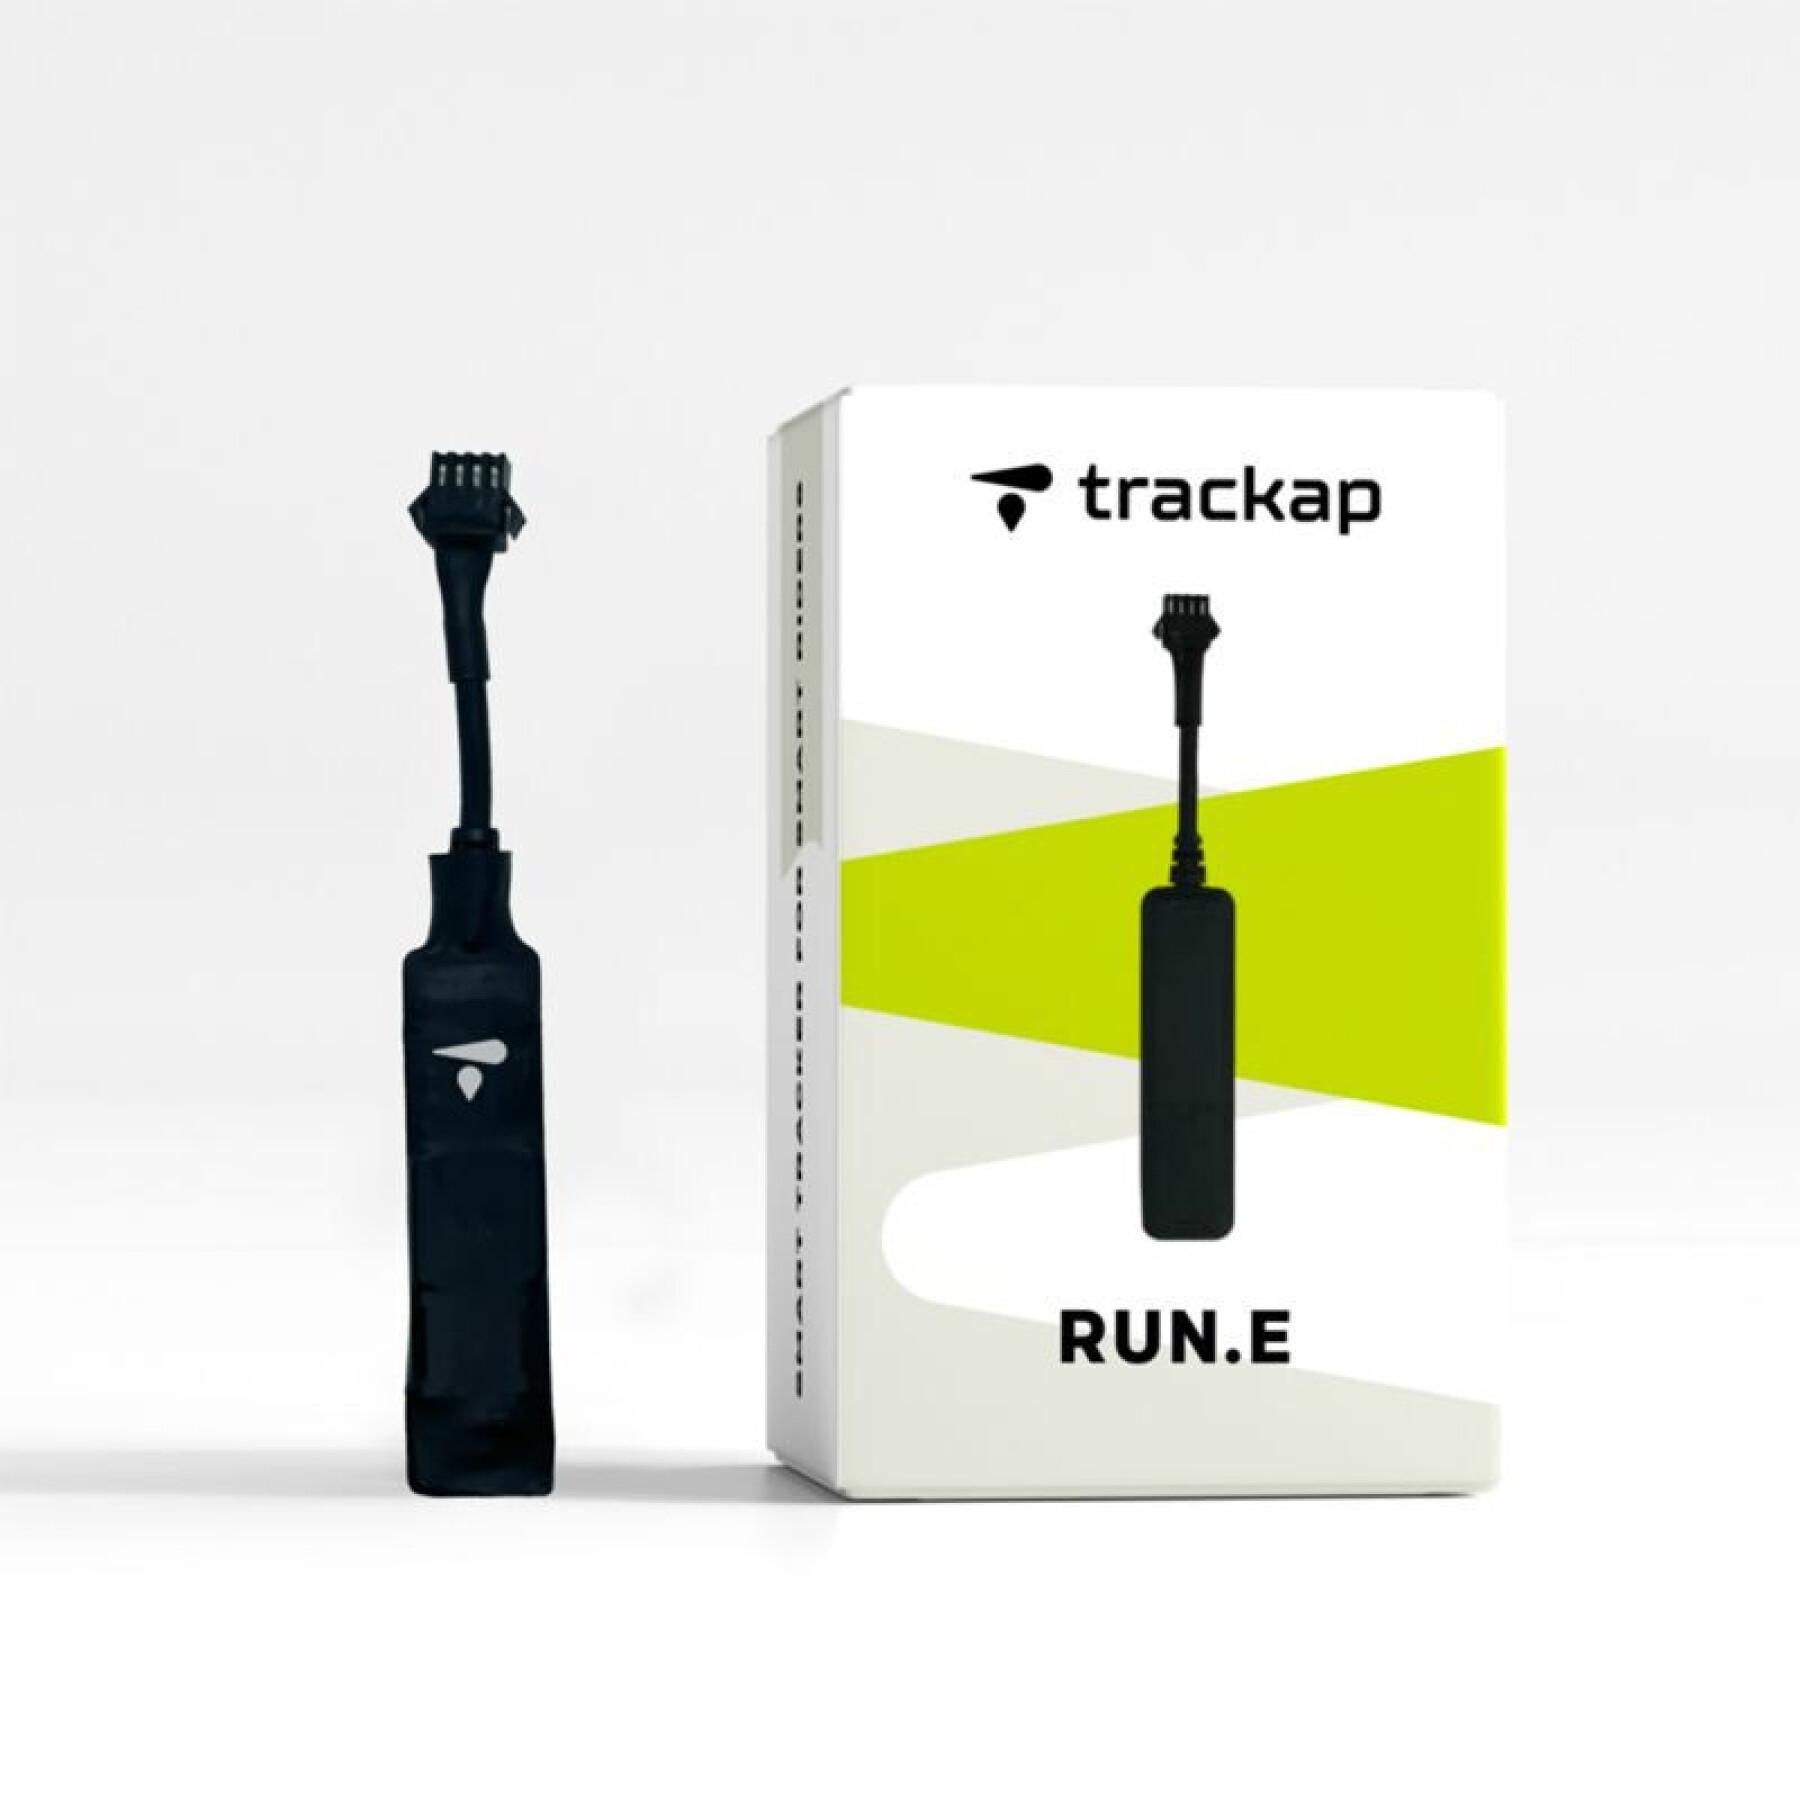 Tracker gps security device with 1 year subscription Trackap Run E Bafang